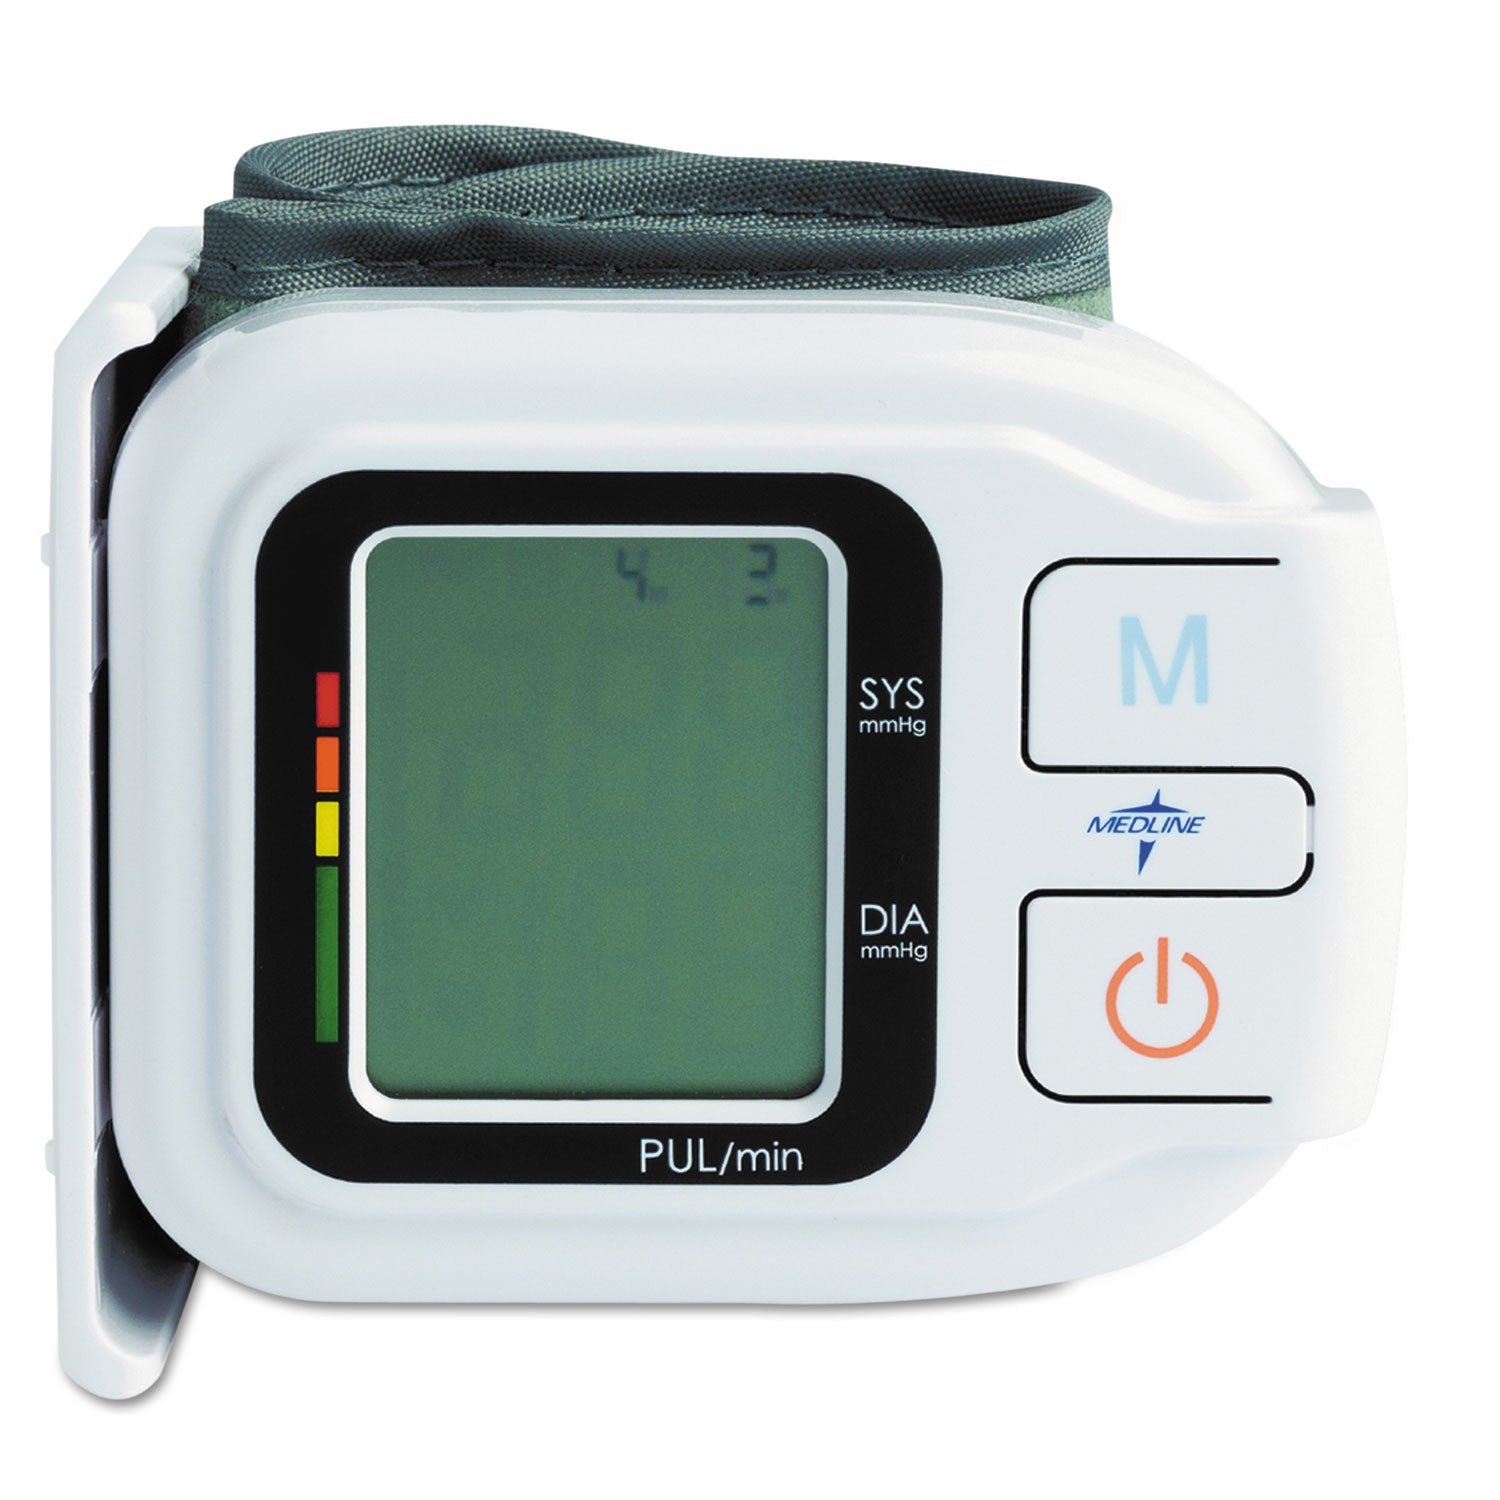 Automatic Digital Wrist Blood Pressure Monitor, One Size Fits All - 